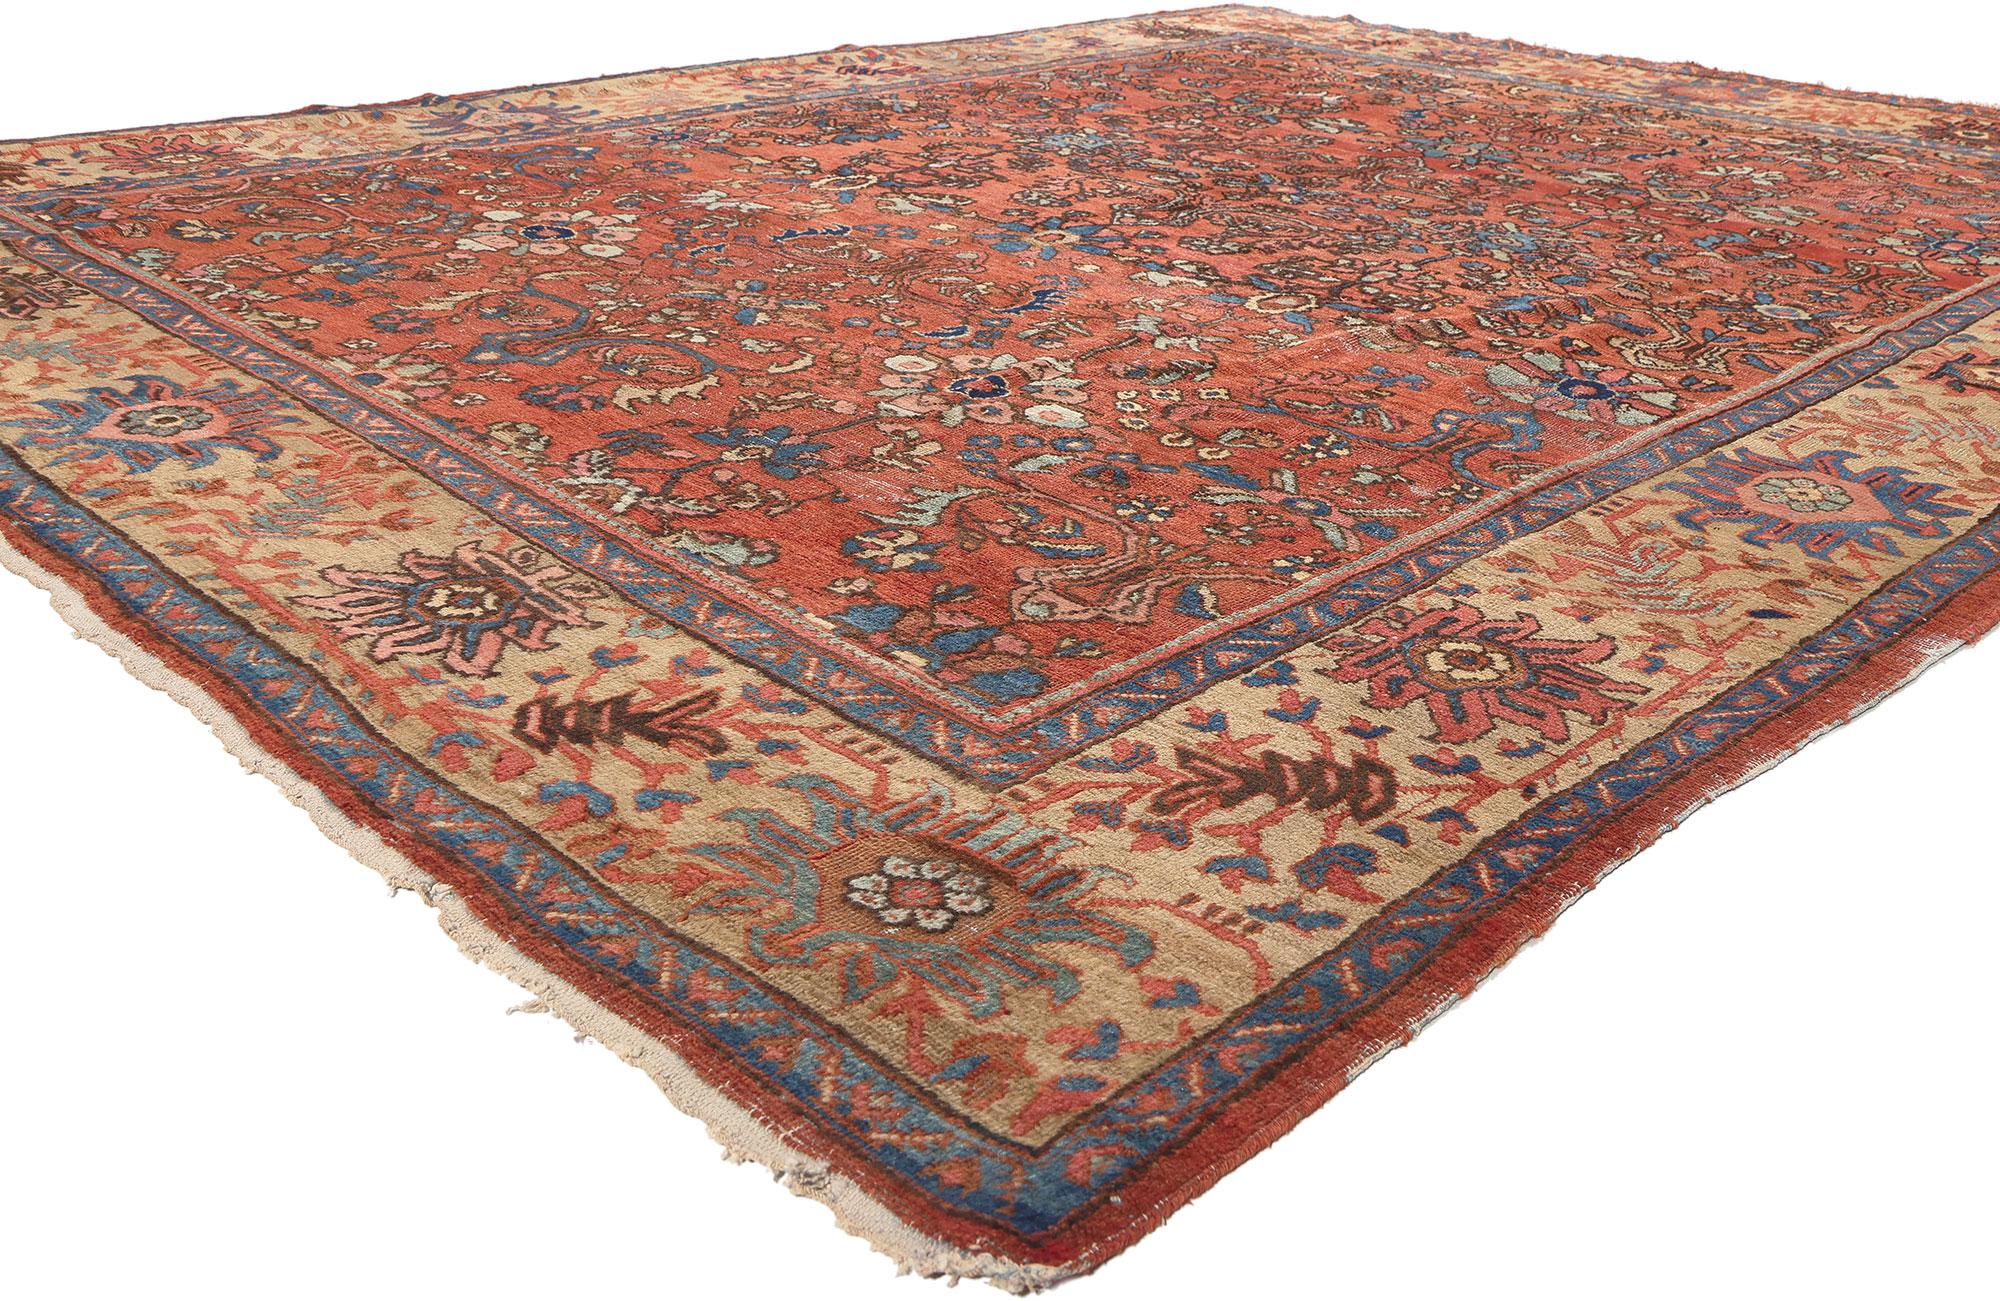 78677 Antique Persian Mahal Rug, 08'01 x 10'06. Immerse yourself in the seamless fusion of relaxed refinement and rustic allure with our meticulously hand-knotted wool antique Persian Mahal rug, showcasing worn-in charm. Revel in the elaborate